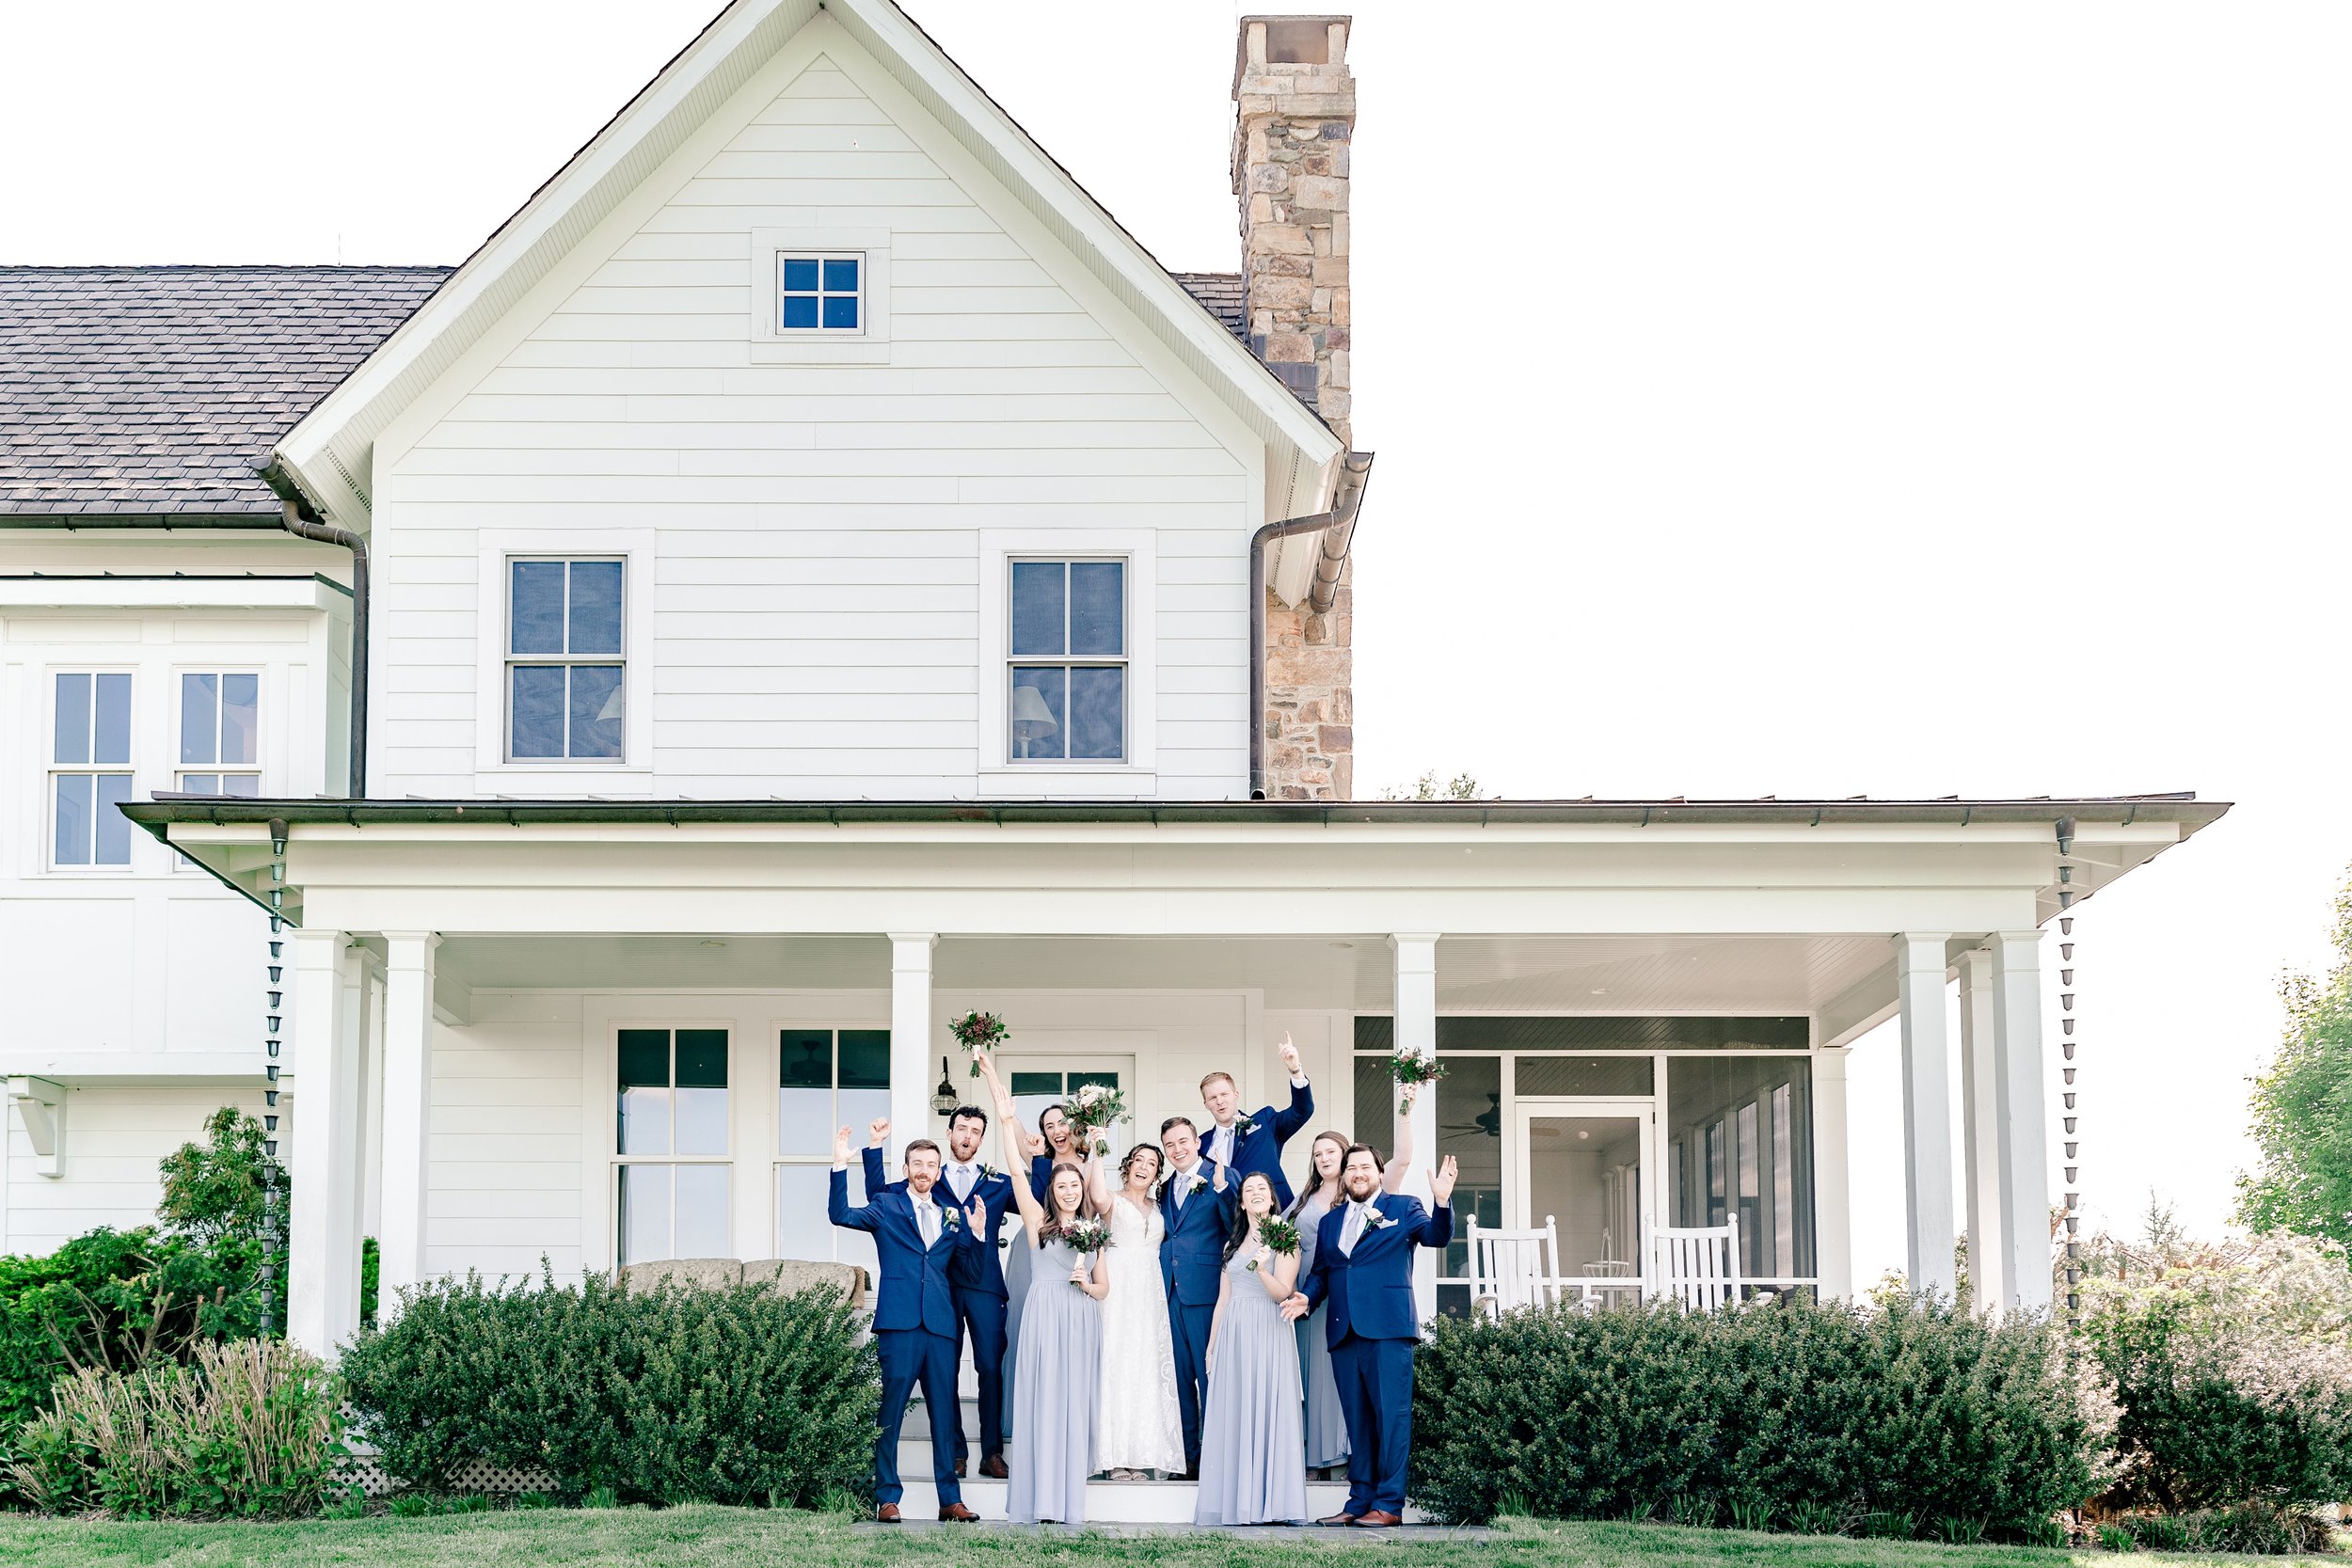 A wedding party posed on the porch of the farm house at one of the best wedding venues in Northern Virginia